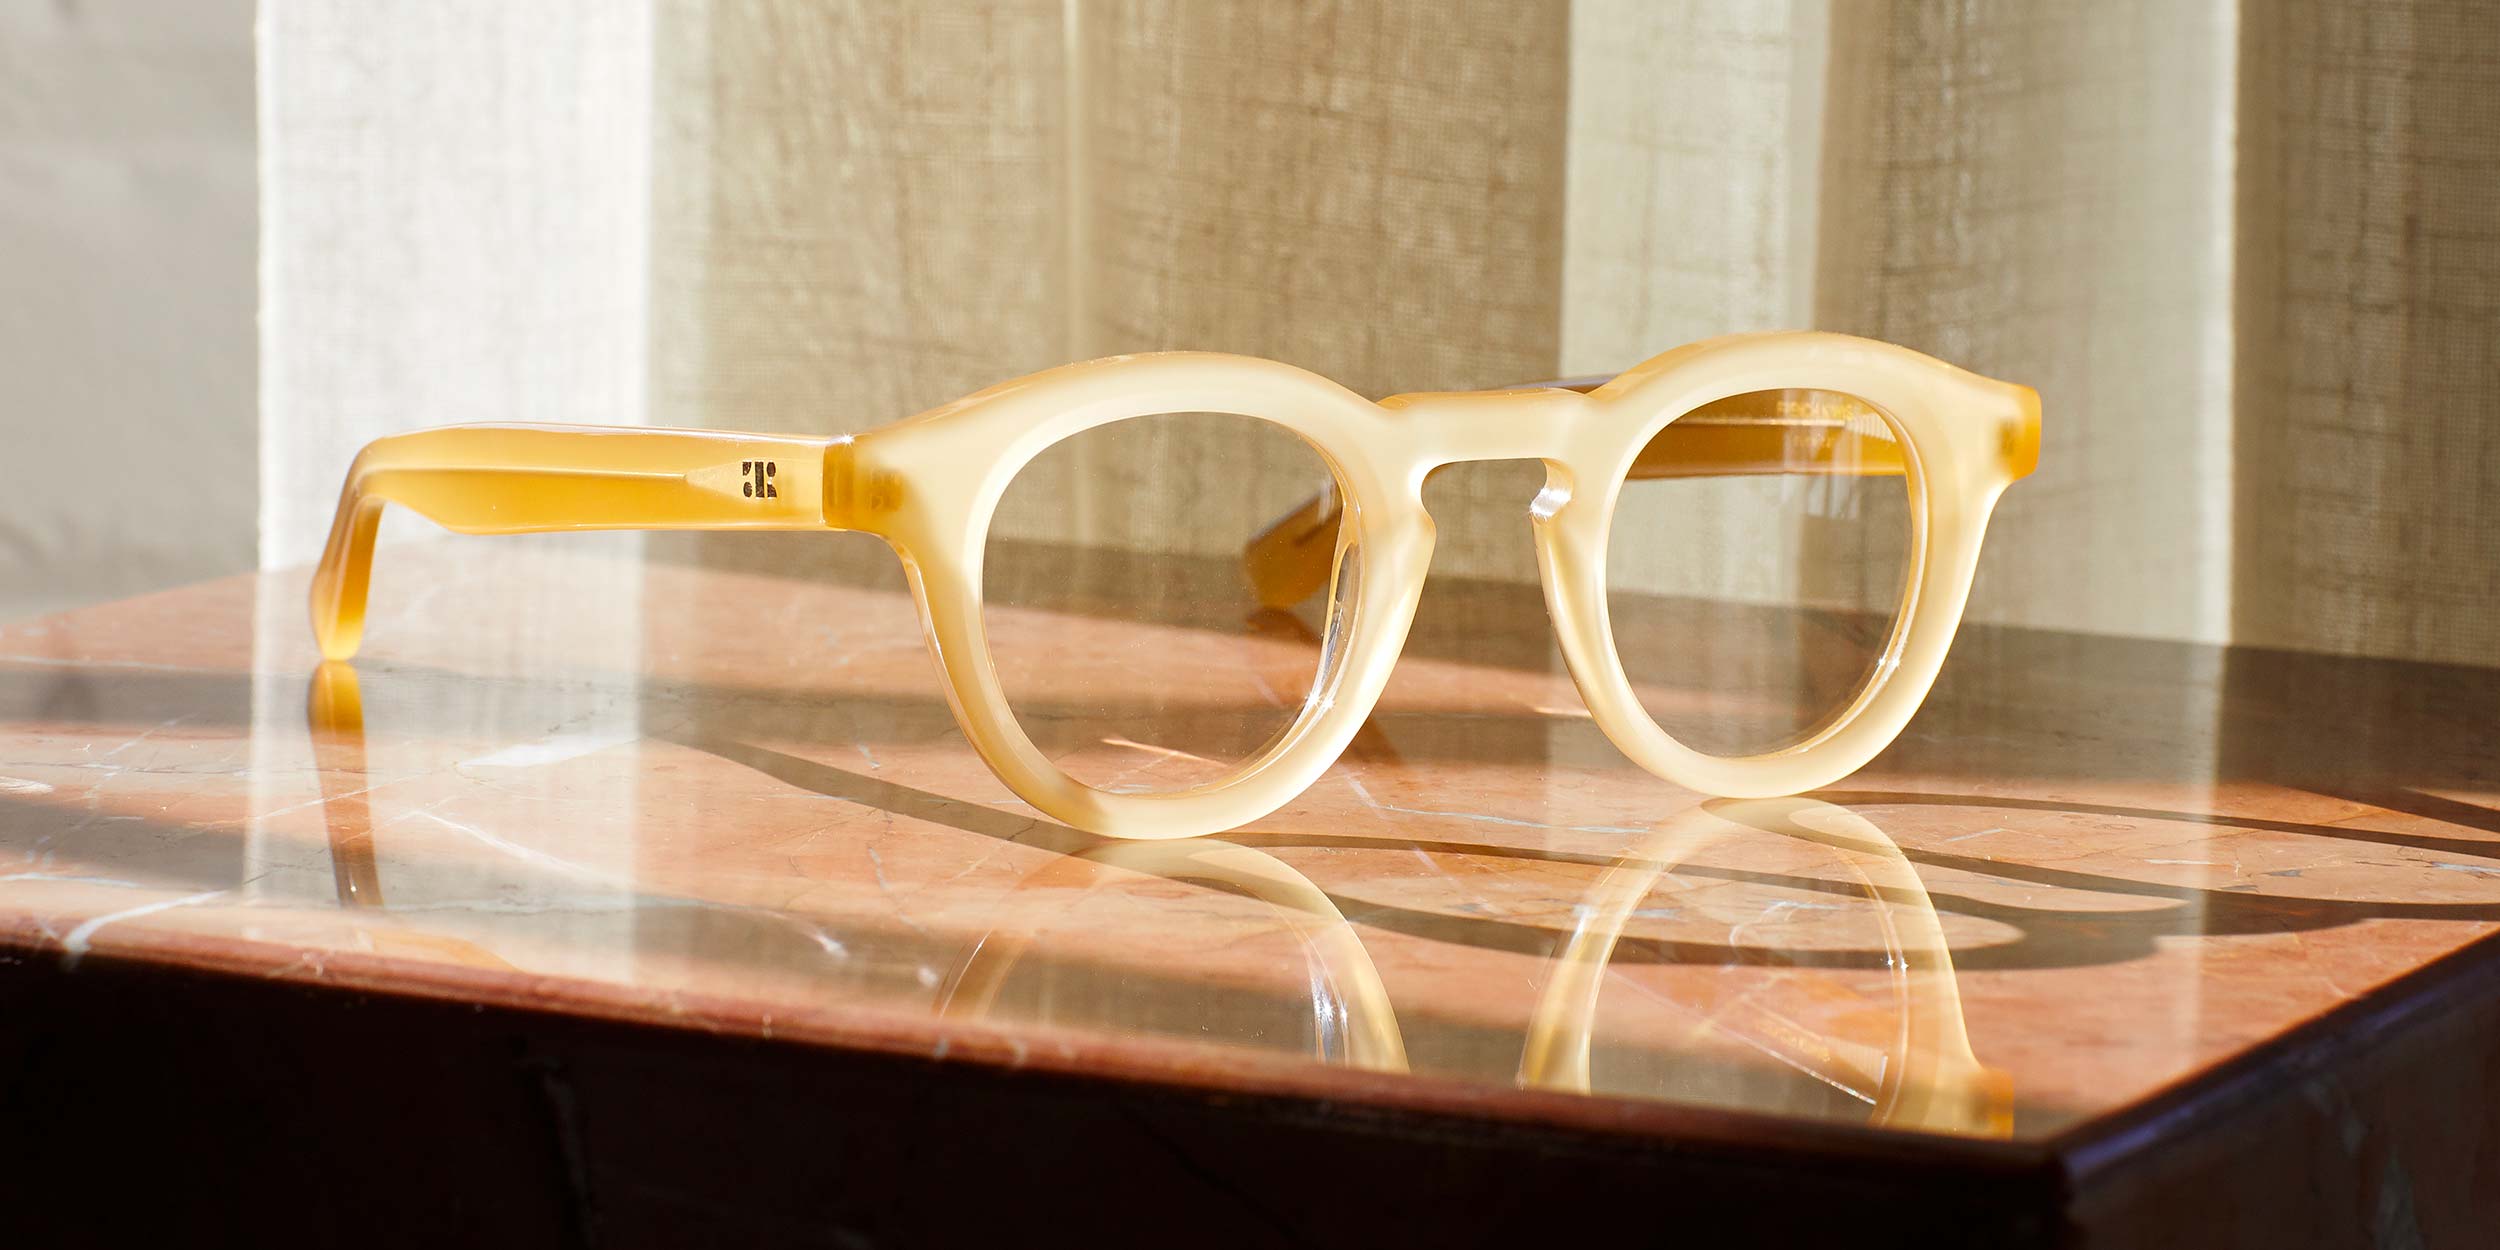 Photo Details of Jude Champagne Reading Glasses in a room